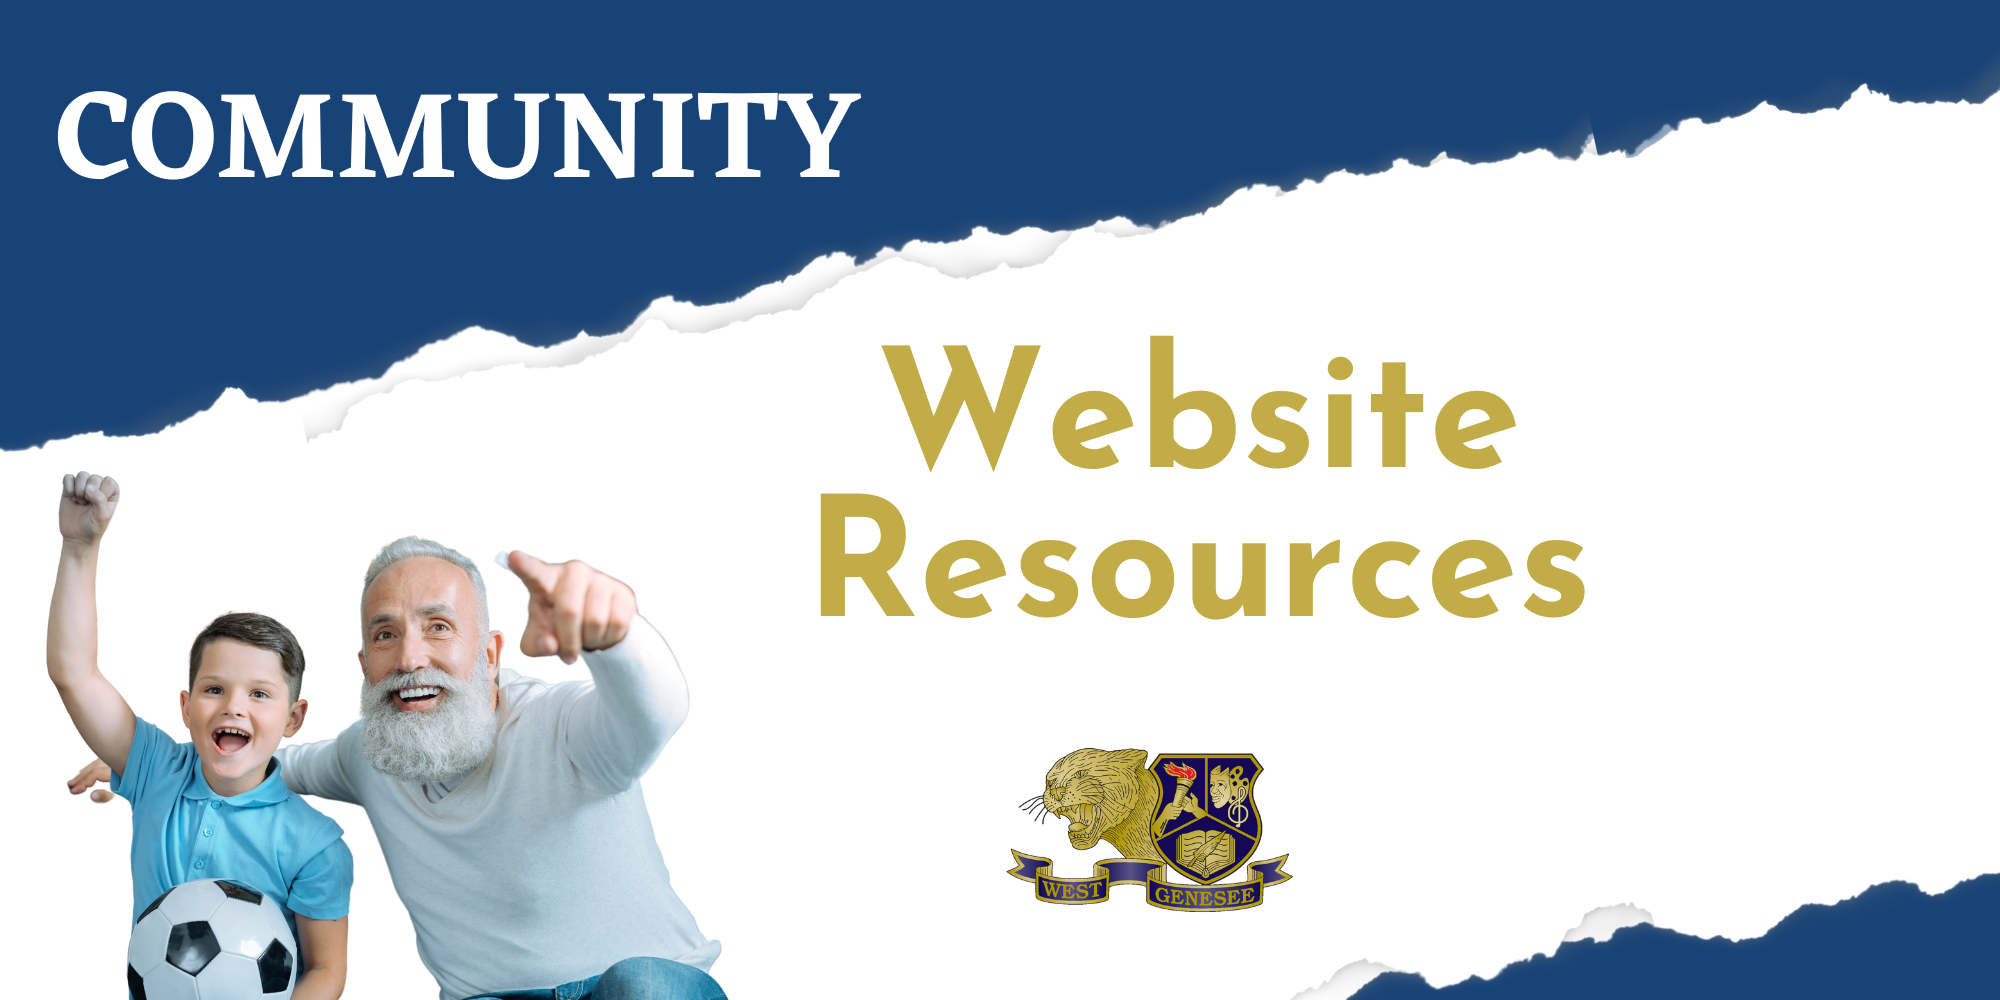 Community Resources on Website